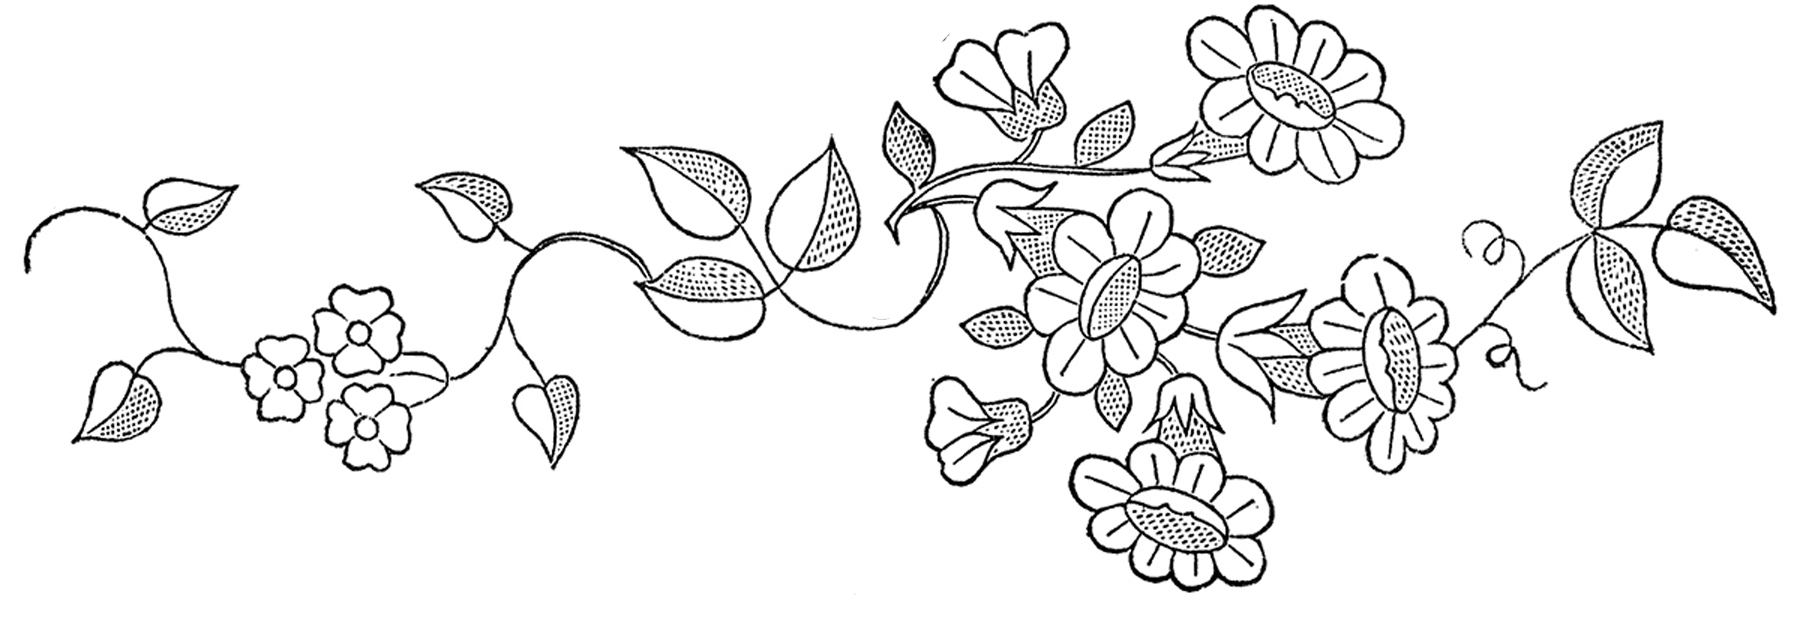 Flower Embroidery Patterns Floral Embroidery Patterns Pretty The Graphics Fairy